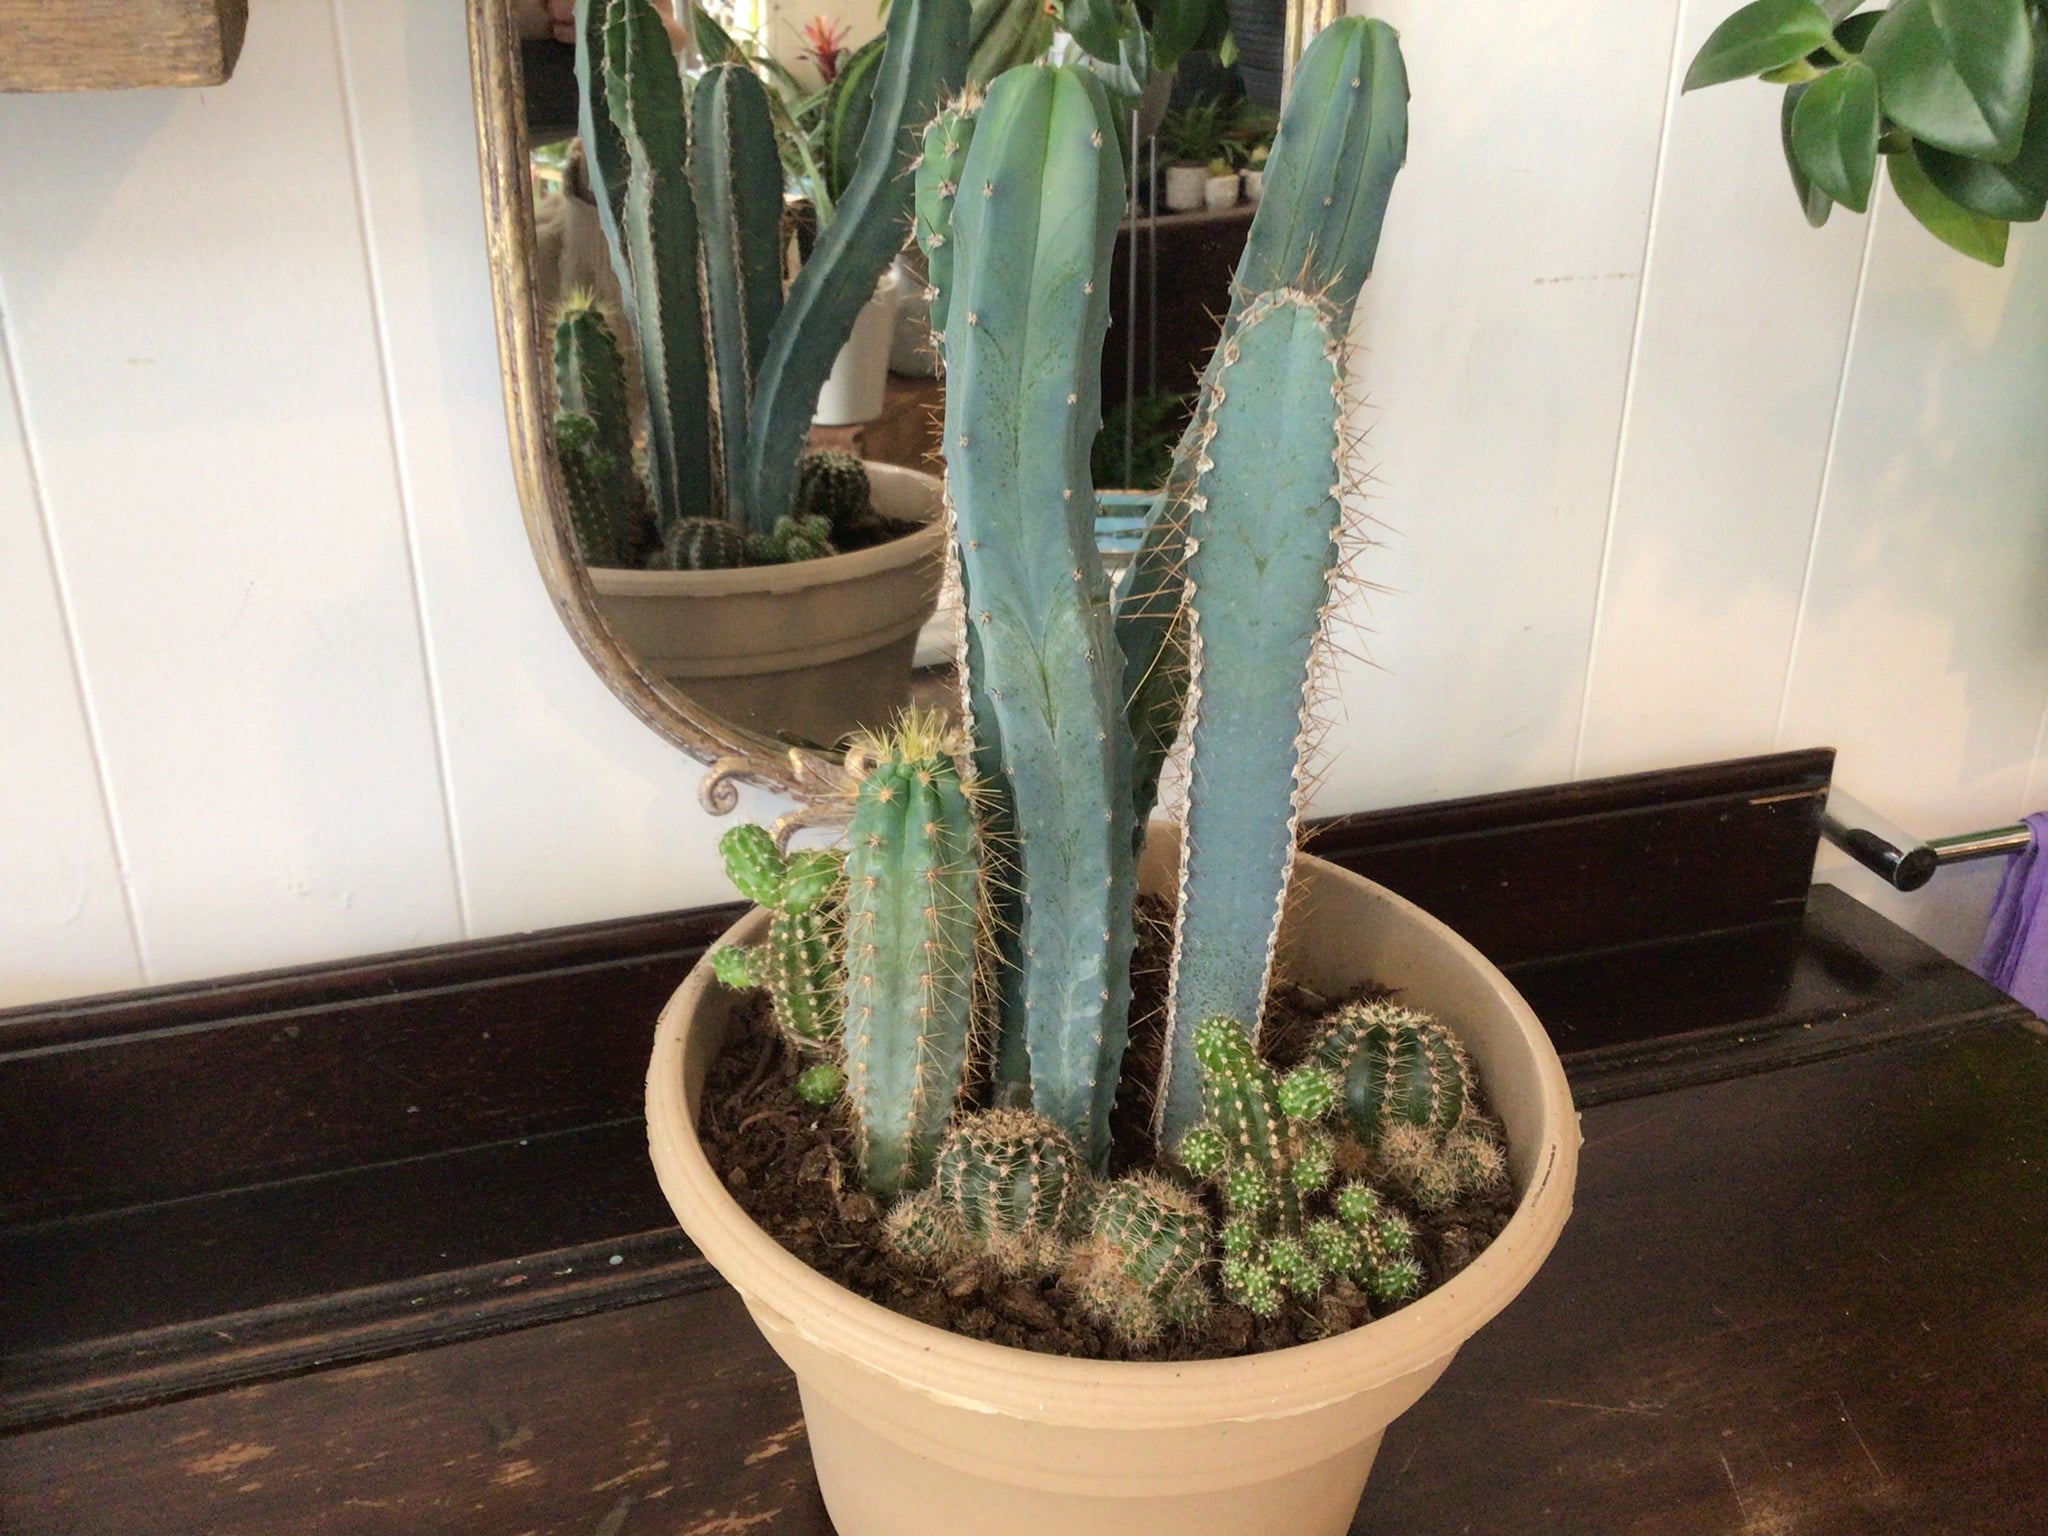 Our cacti are grown right here in Ontario from small greenhouse farms in the Niagara region.

Nicely planted into a growers pot. This planter would suit an office or home.

We are unable to pick plants for same-day pick-up or delivery.